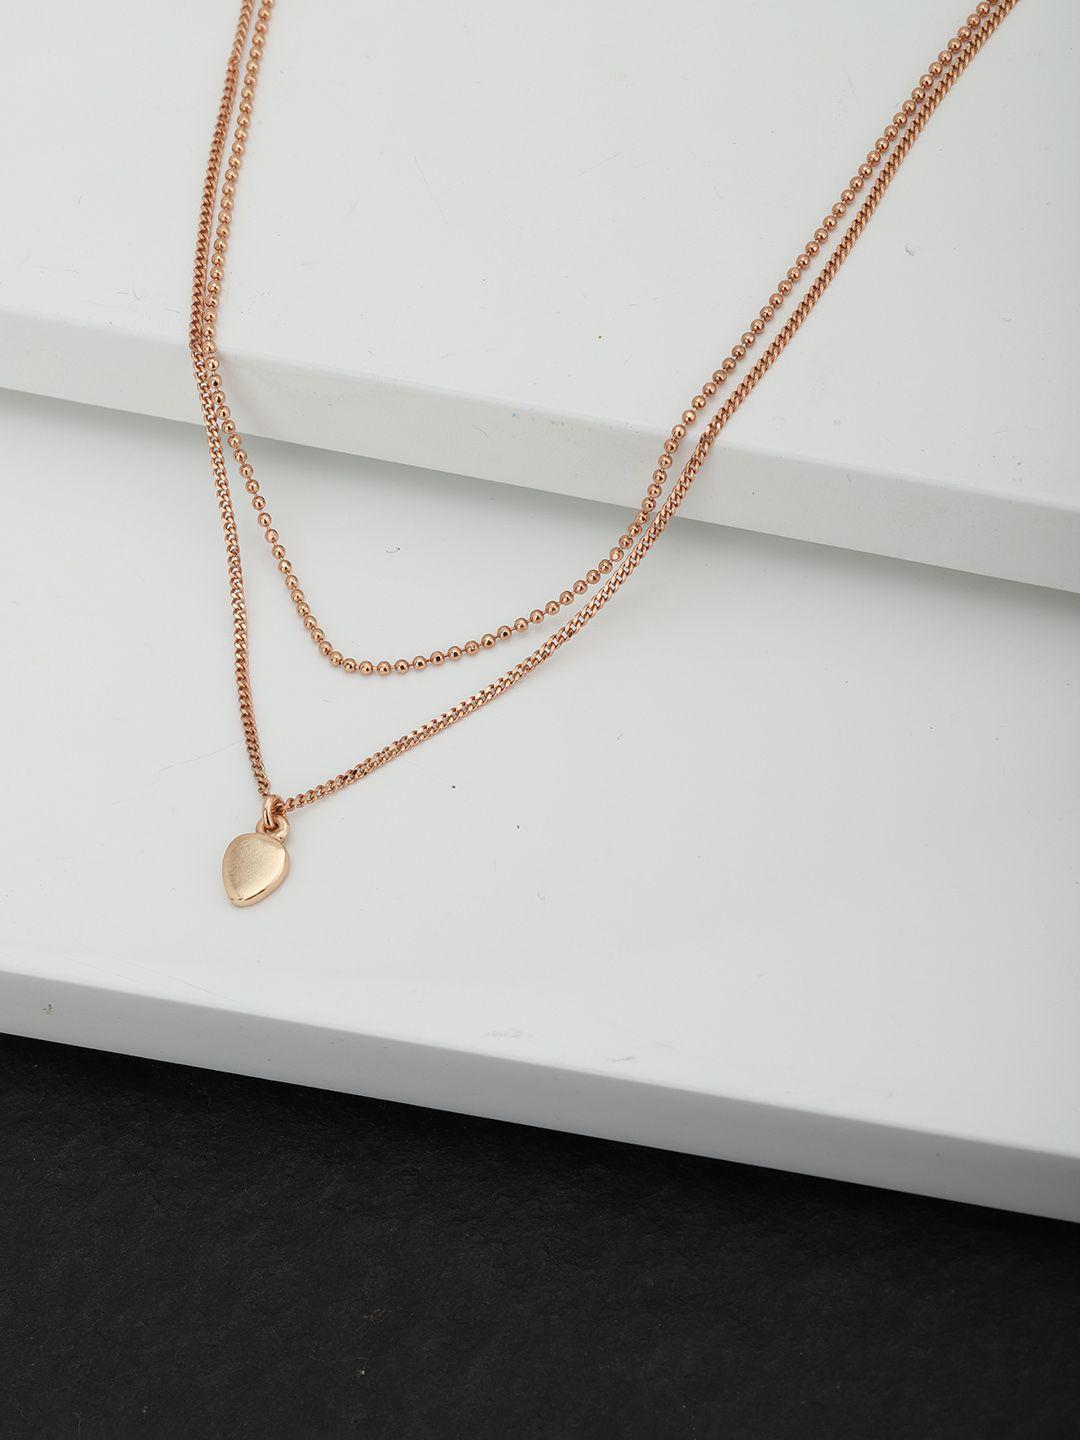 carlton london gold-plated layered necklace